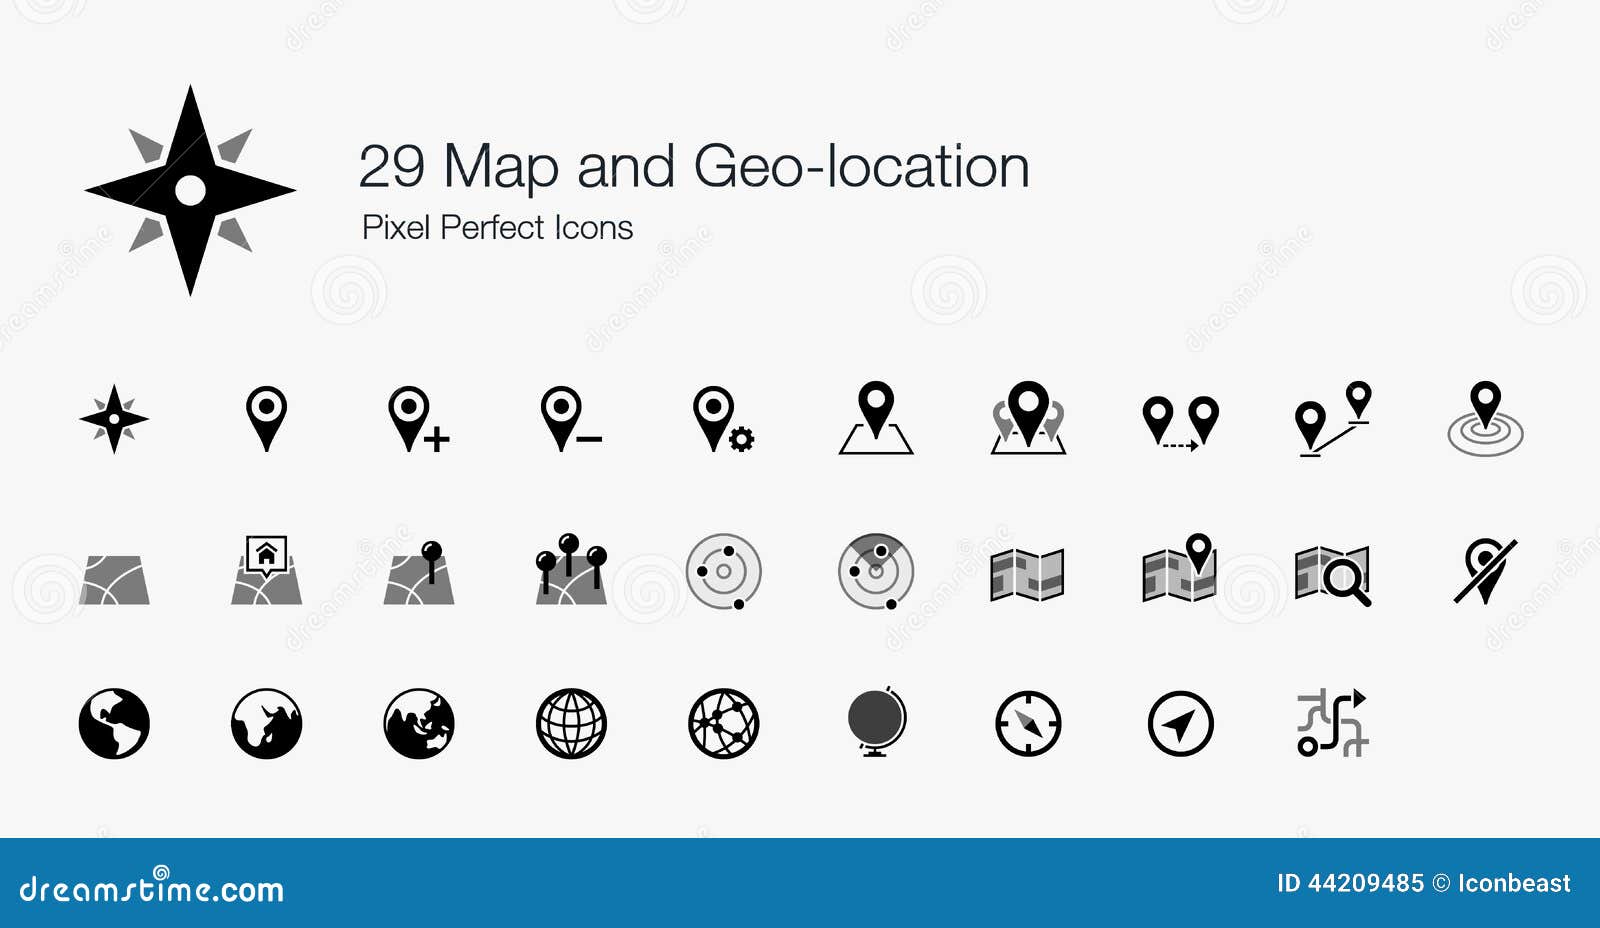 29 map and geo-location pixel perfect icons